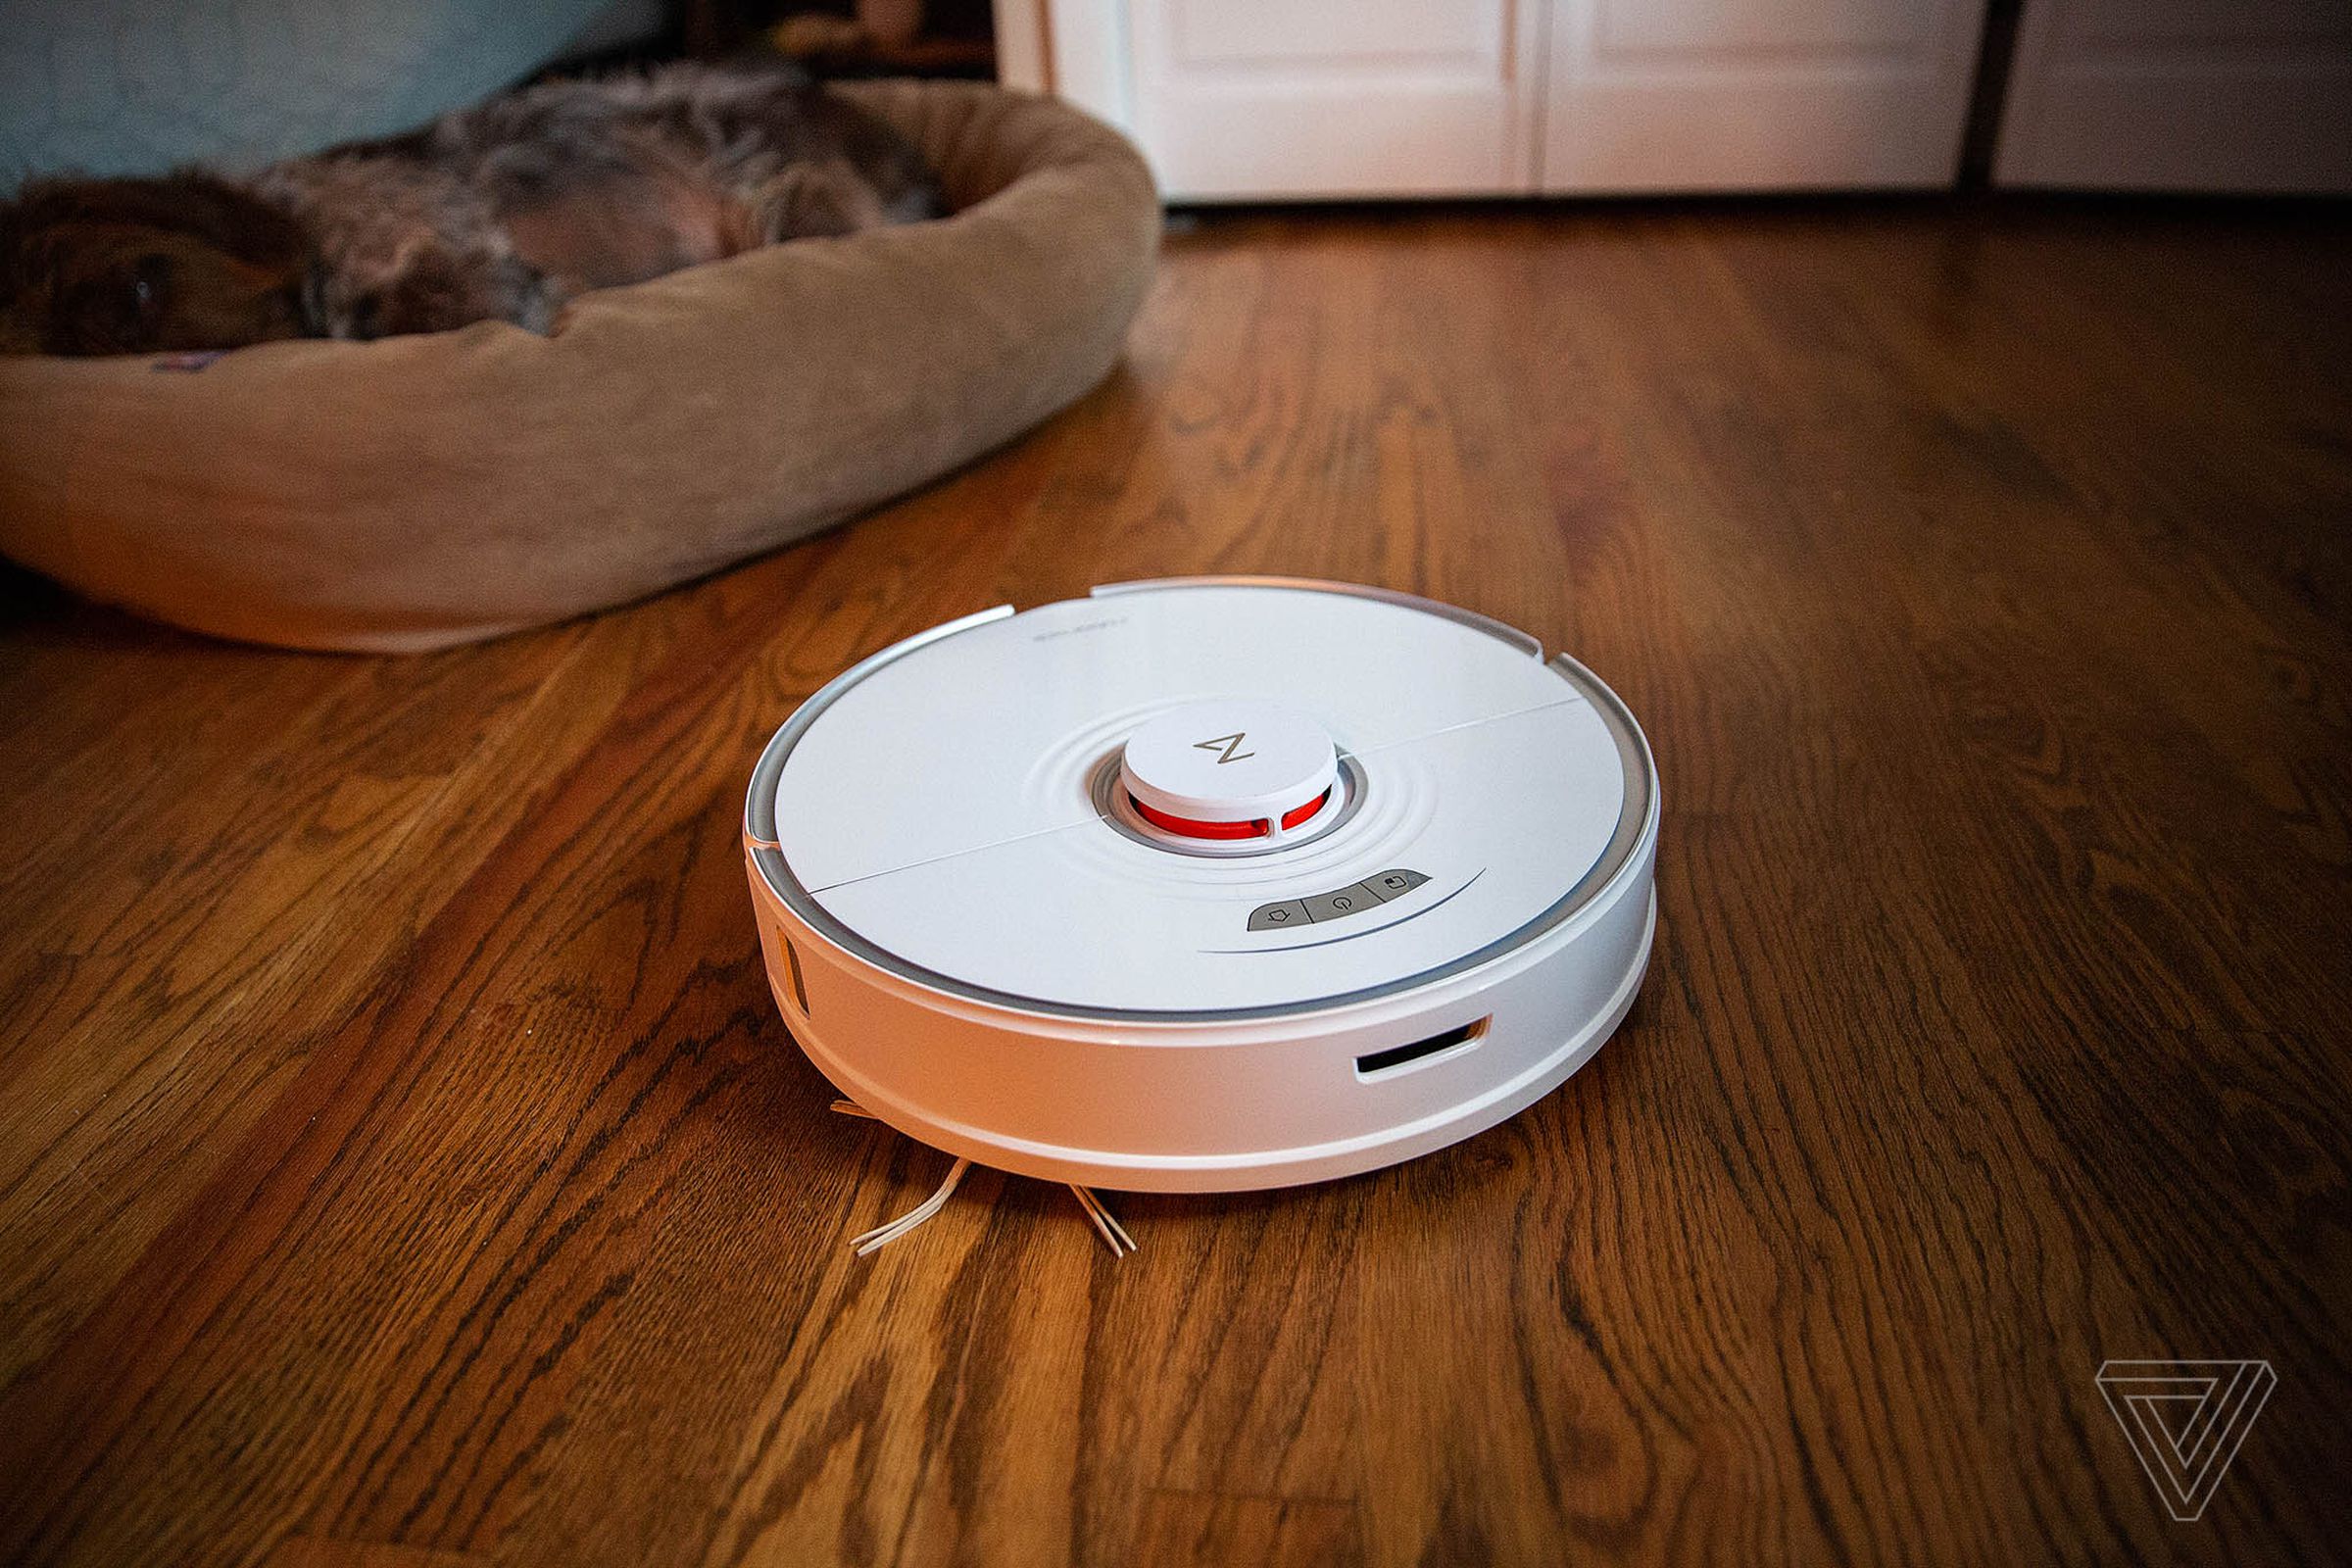 The Roborock S7 vacuum can be controlled with Alexa voice commands.